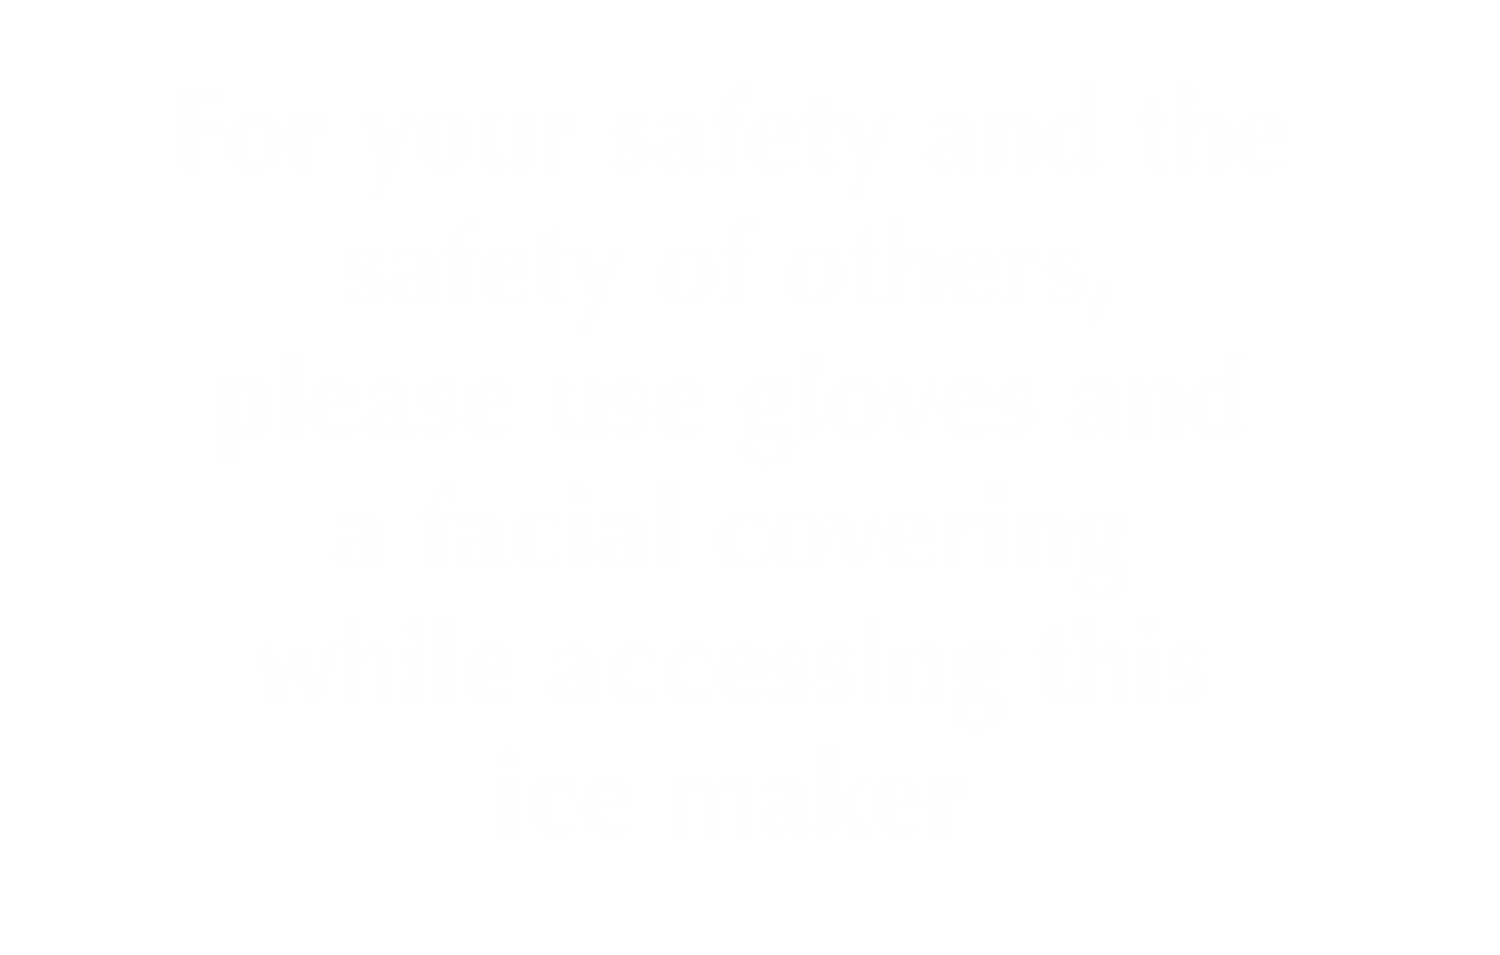 For Your Safety Use Gloves While Accessing Ice Maker Sign